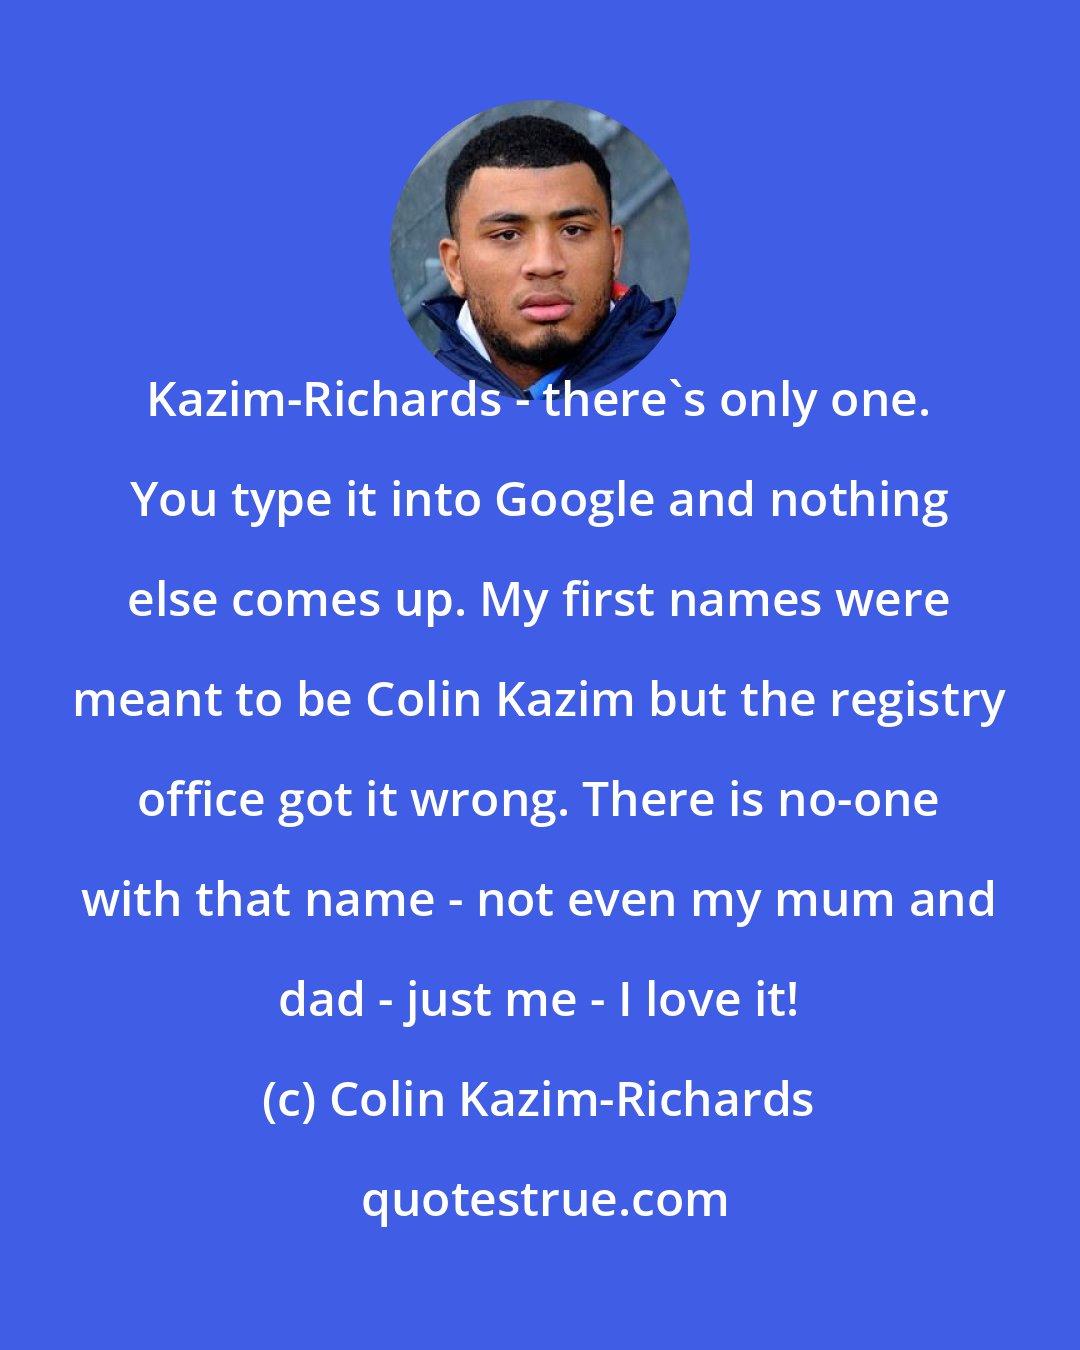 Colin Kazim-Richards: Kazim-Richards - there's only one. You type it into Google and nothing else comes up. My first names were meant to be Colin Kazim but the registry office got it wrong. There is no-one with that name - not even my mum and dad - just me - I love it!